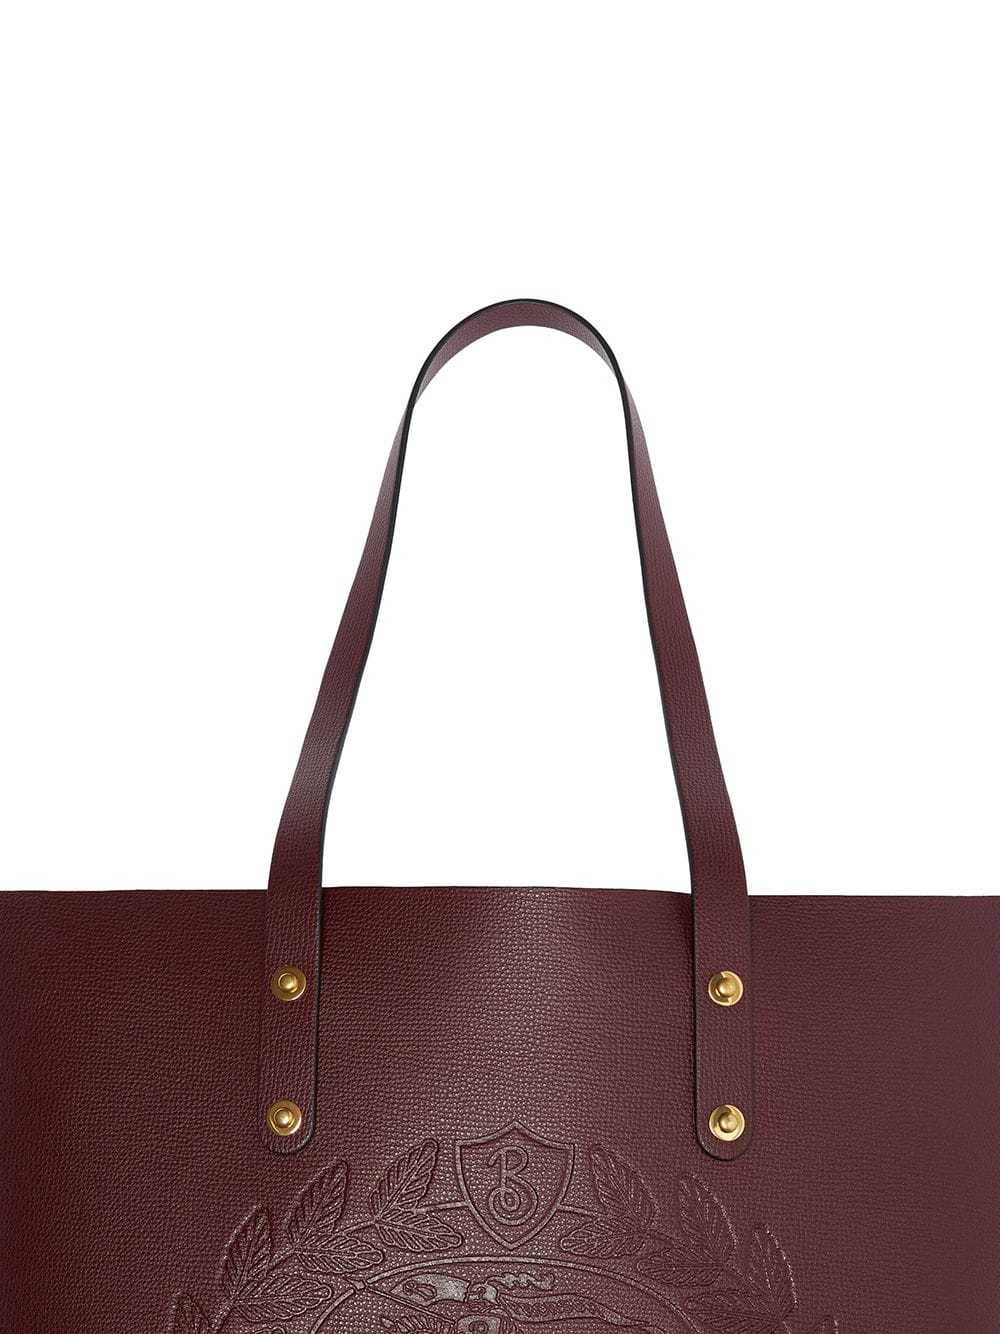 burberry embossed crest small leather tote